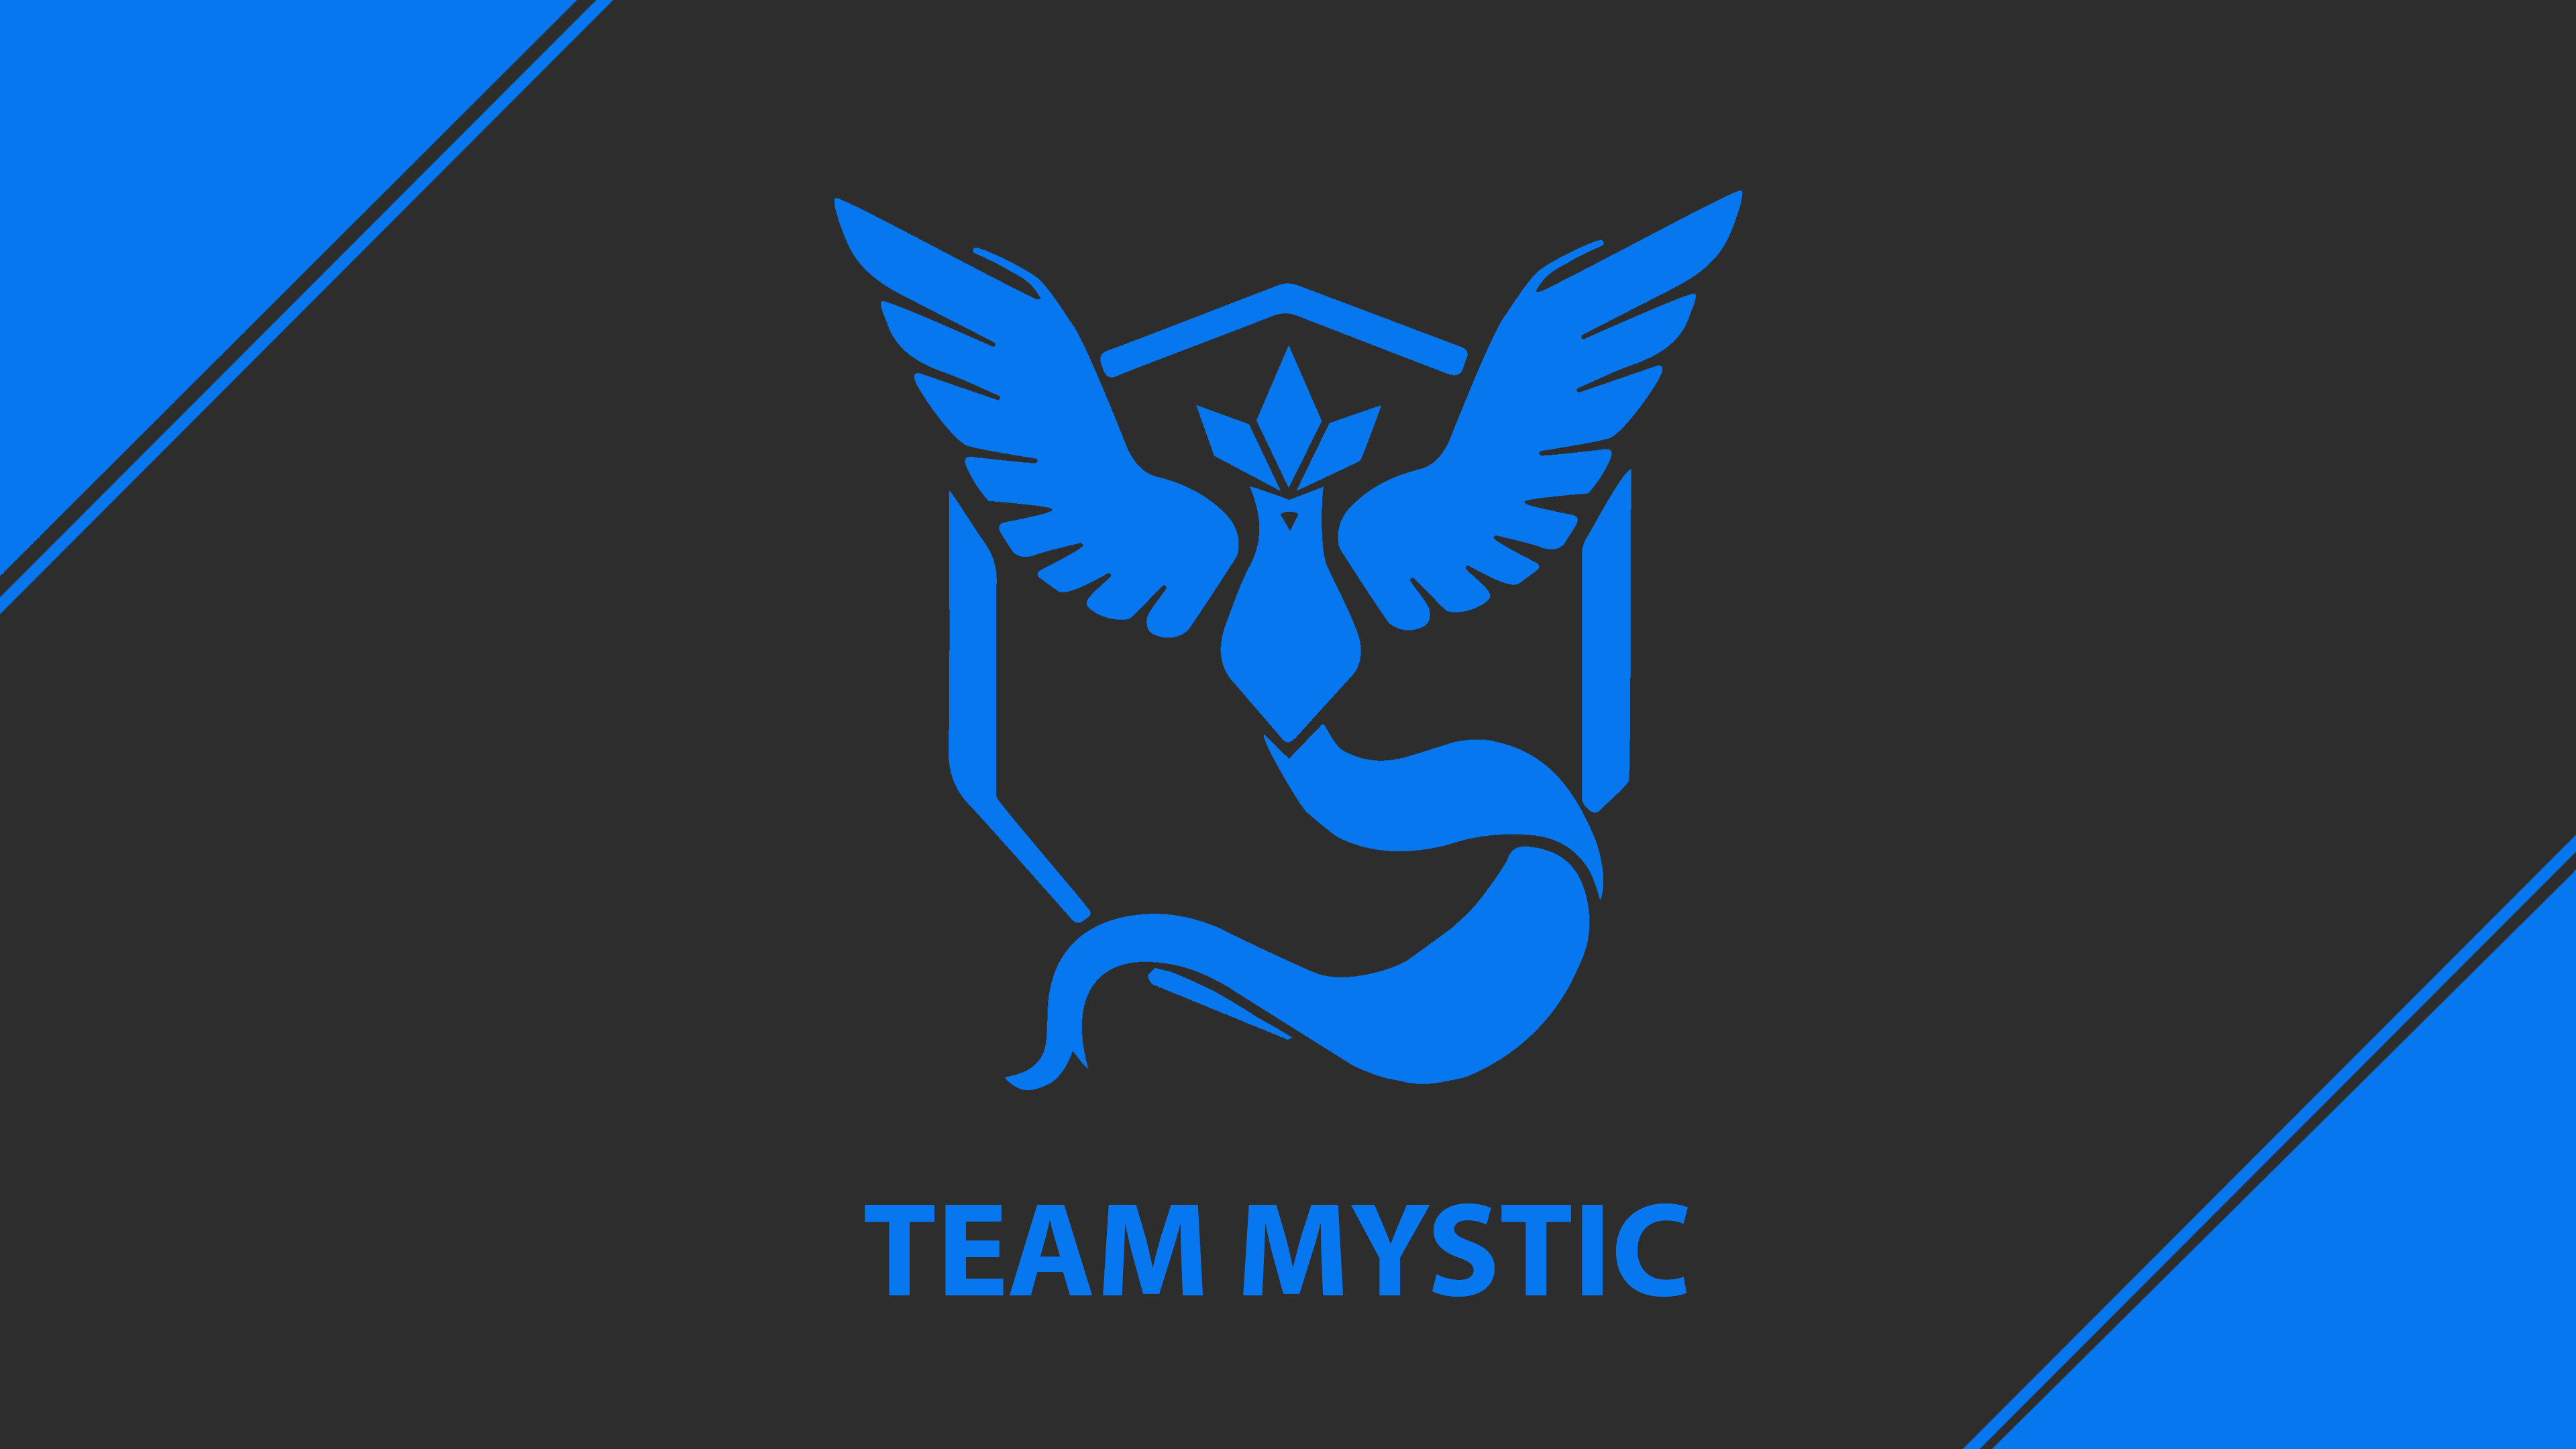 3840x2160 20+ Team Mystic HD Wallpapers and Backgrounds